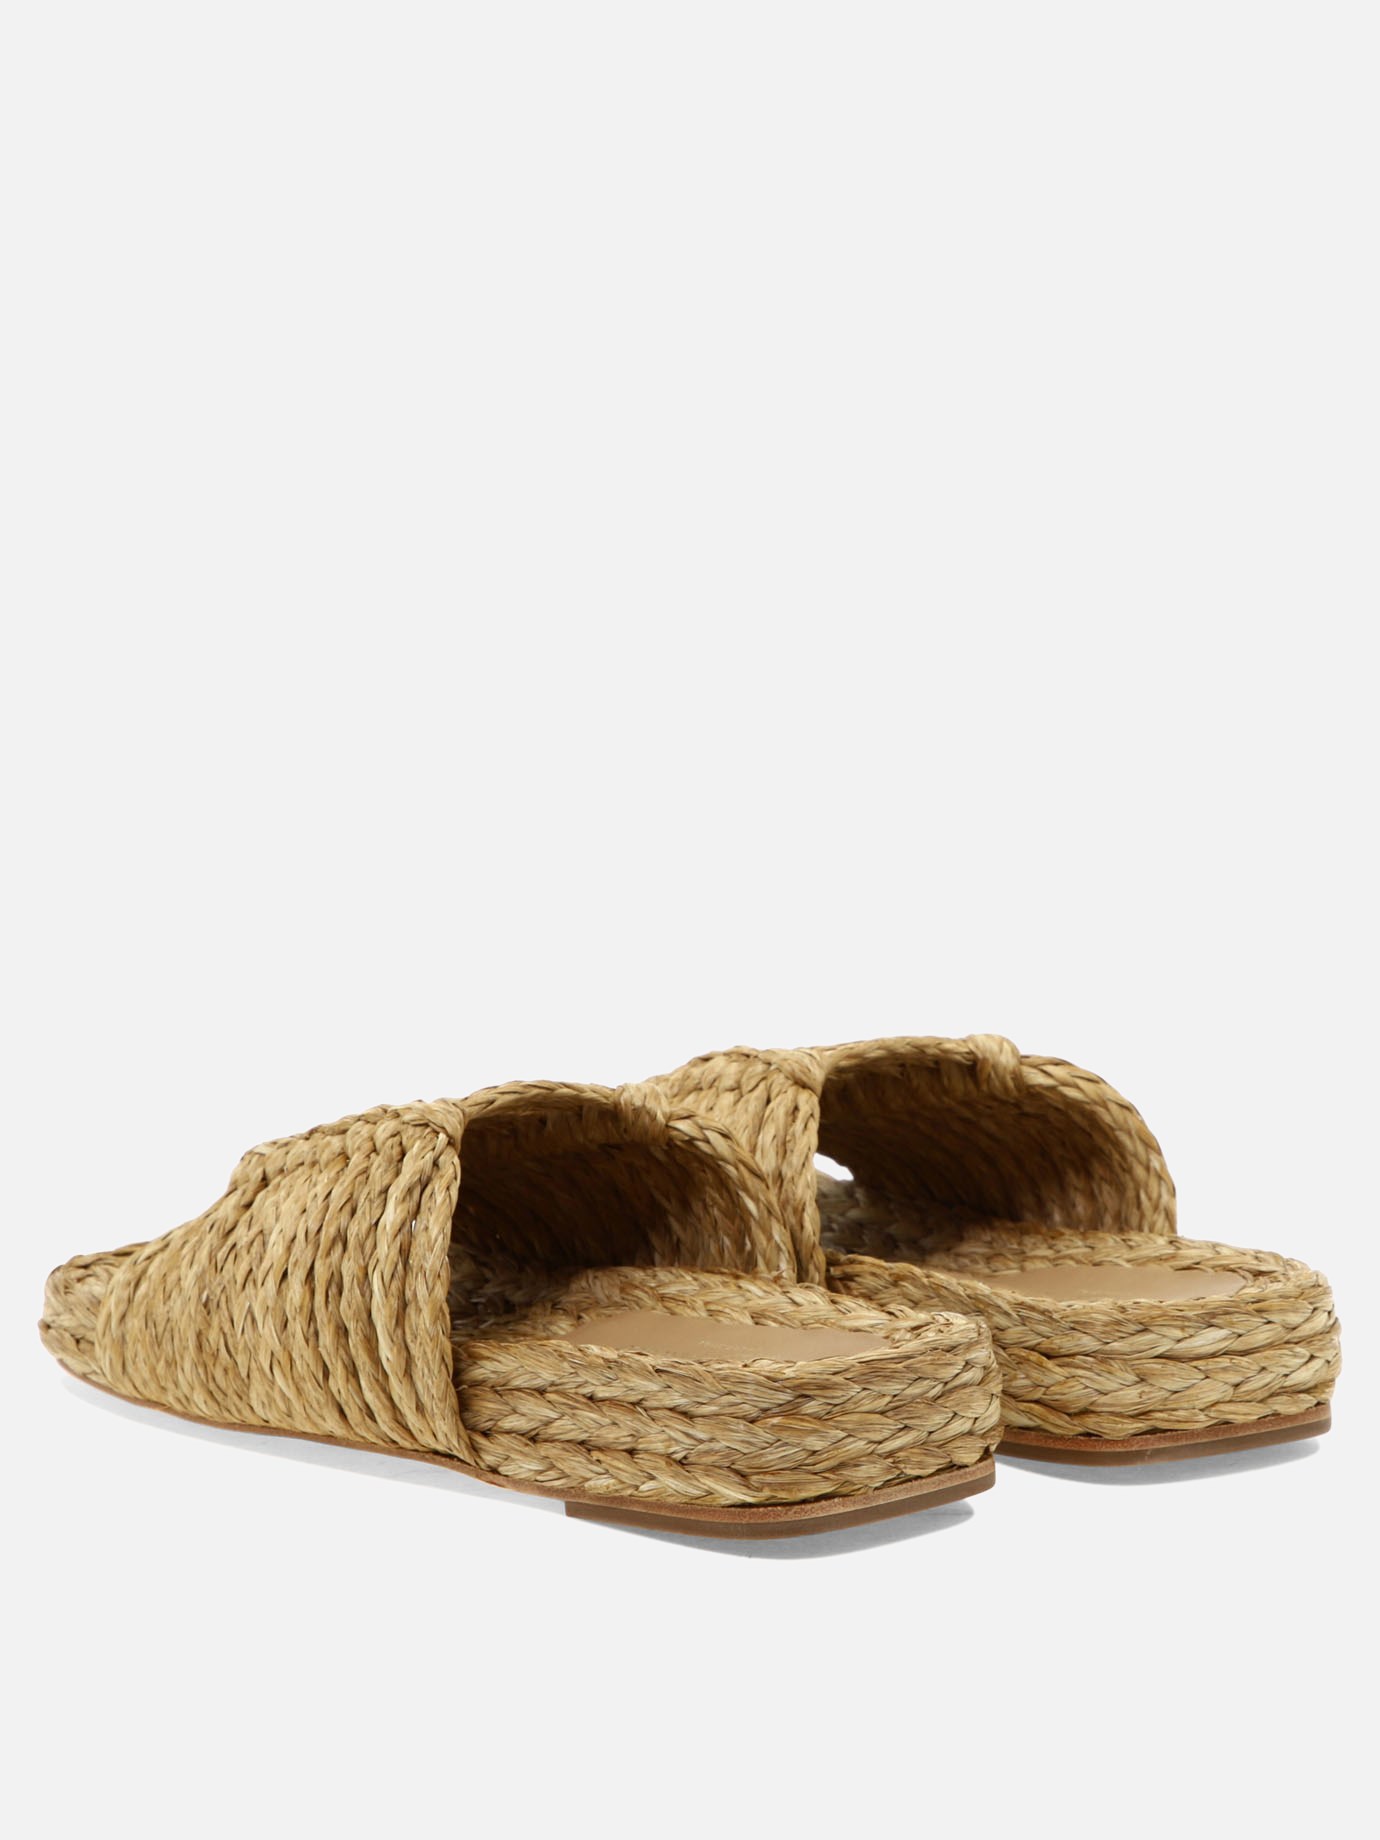  Tanh  sandals by Paloma Barceló